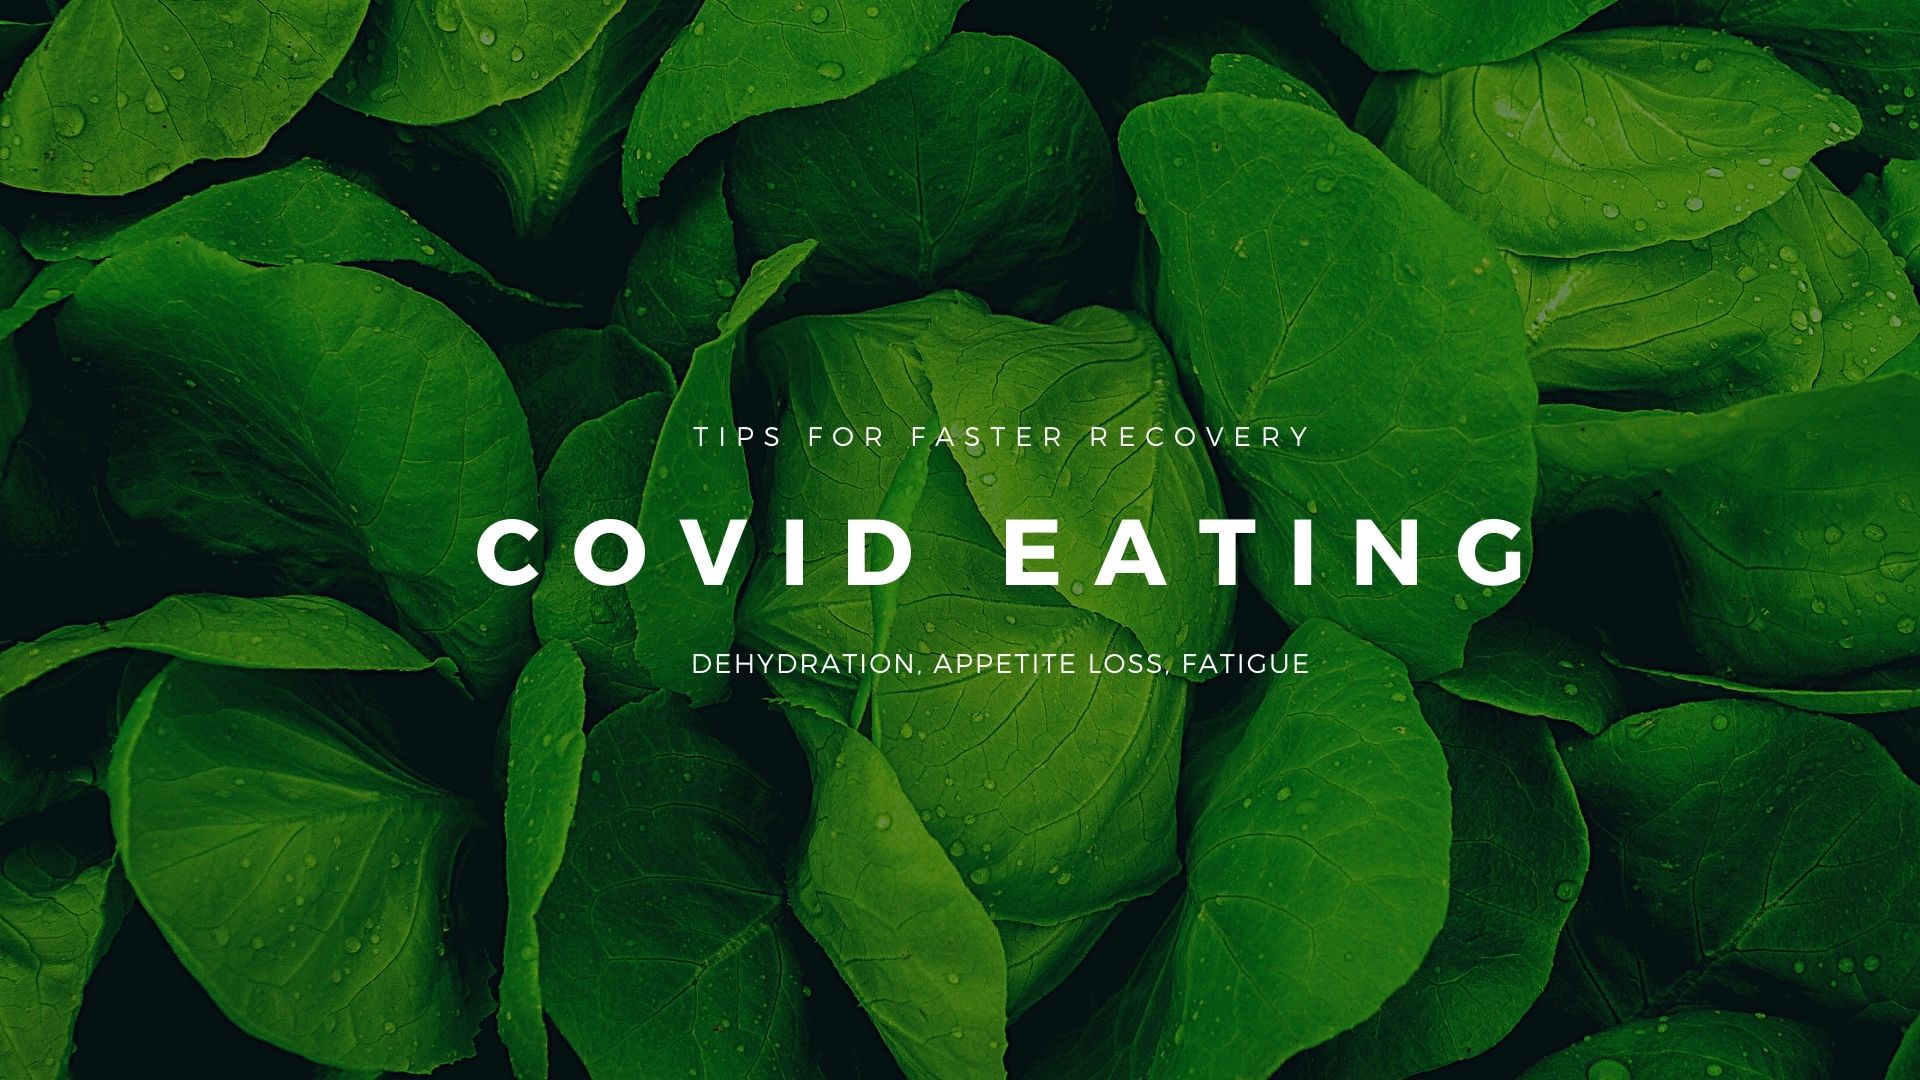 Covid Eating - Fight Dehydration, Loss of Appetite, Fatigue